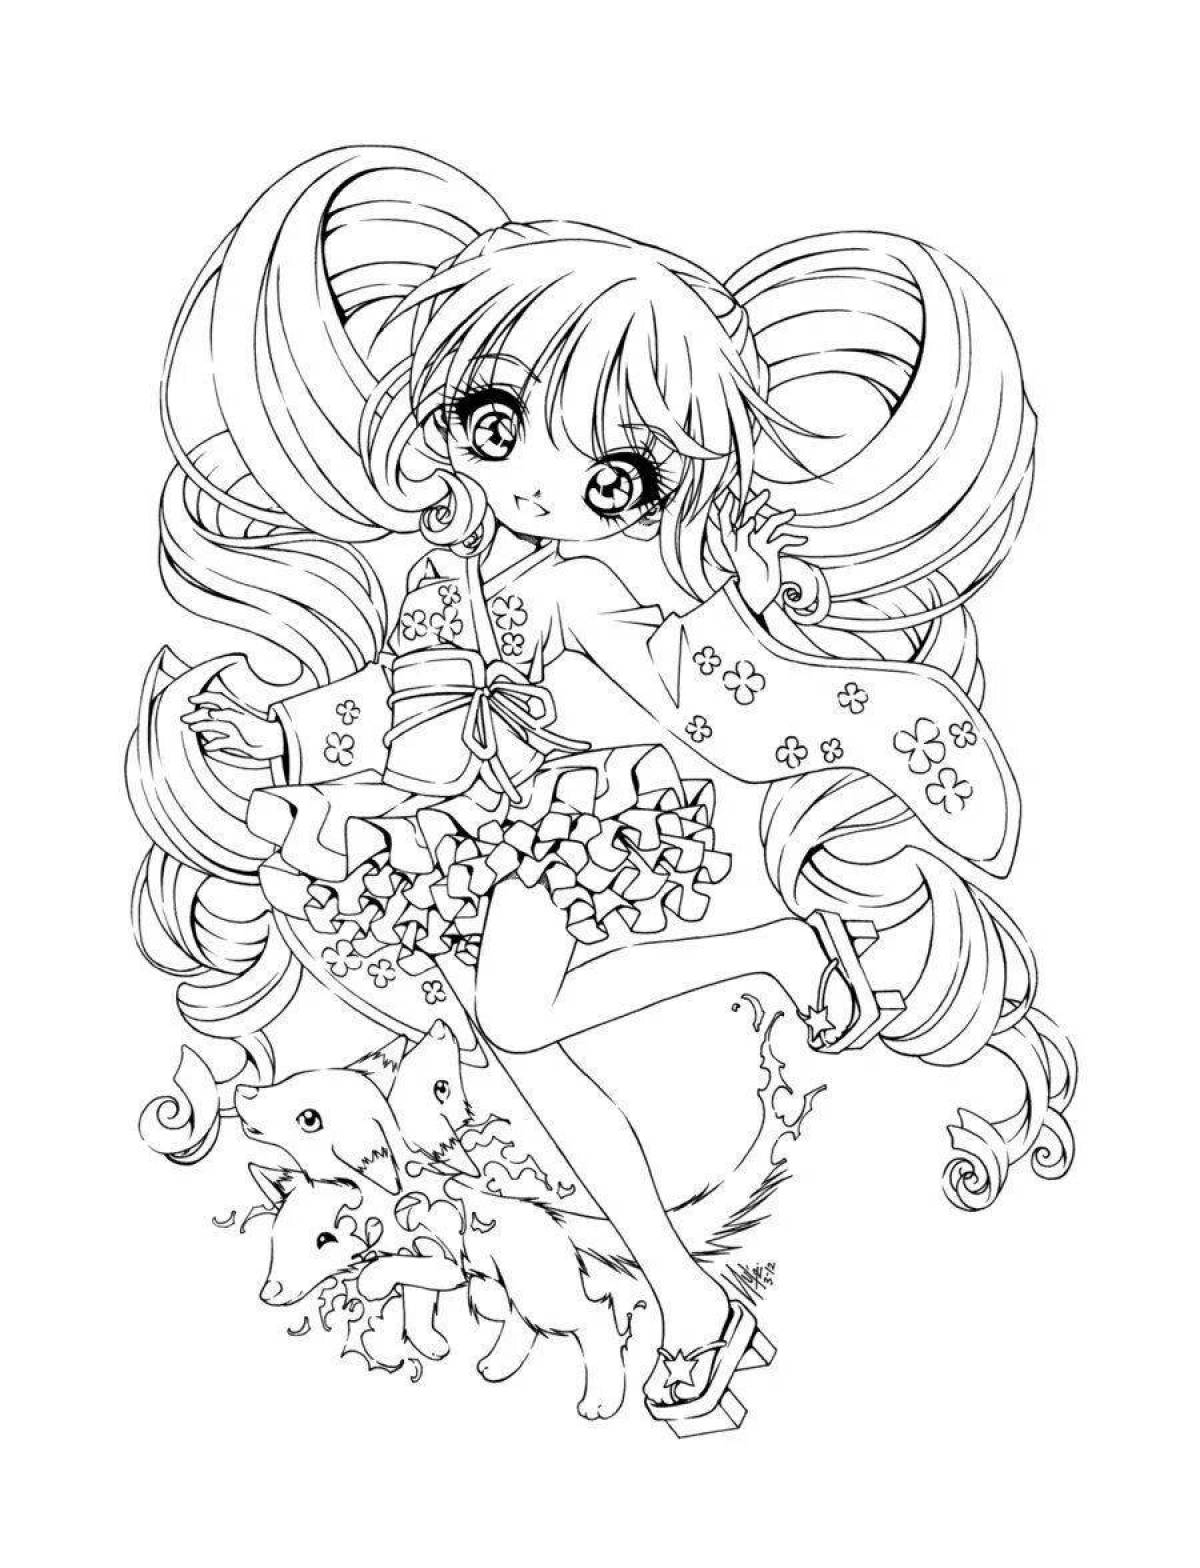 Exquisite anime animal coloring book for girls